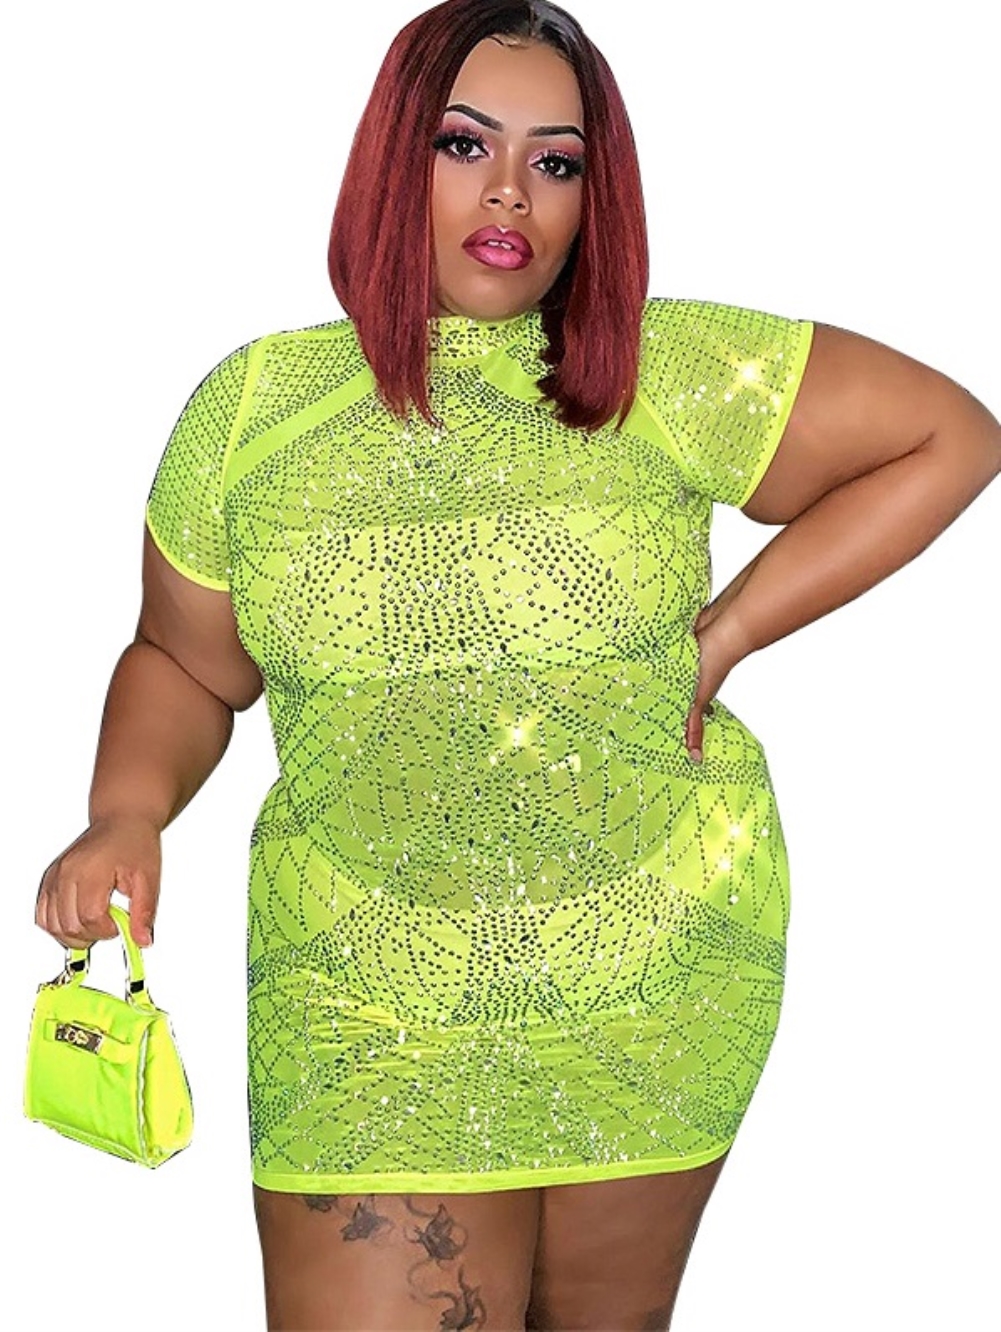 neon plus size outfits